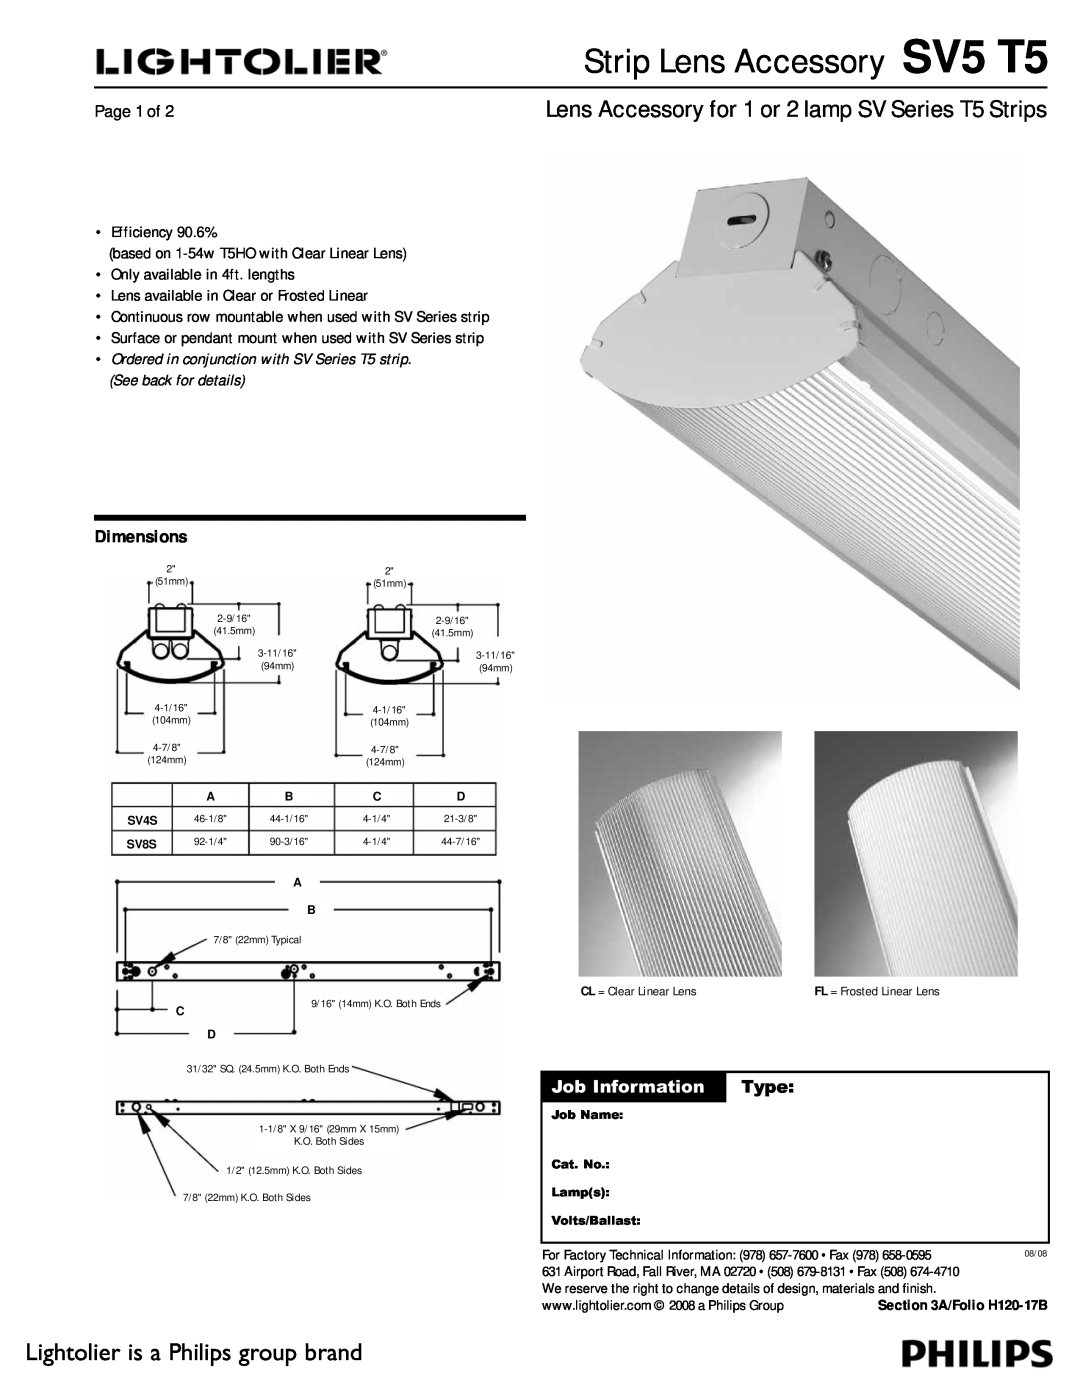 Lightolier dimensions Strip Lens Accessory SV5 T5, Lightolier is a Philips group brand, Dimensions, Job Information 